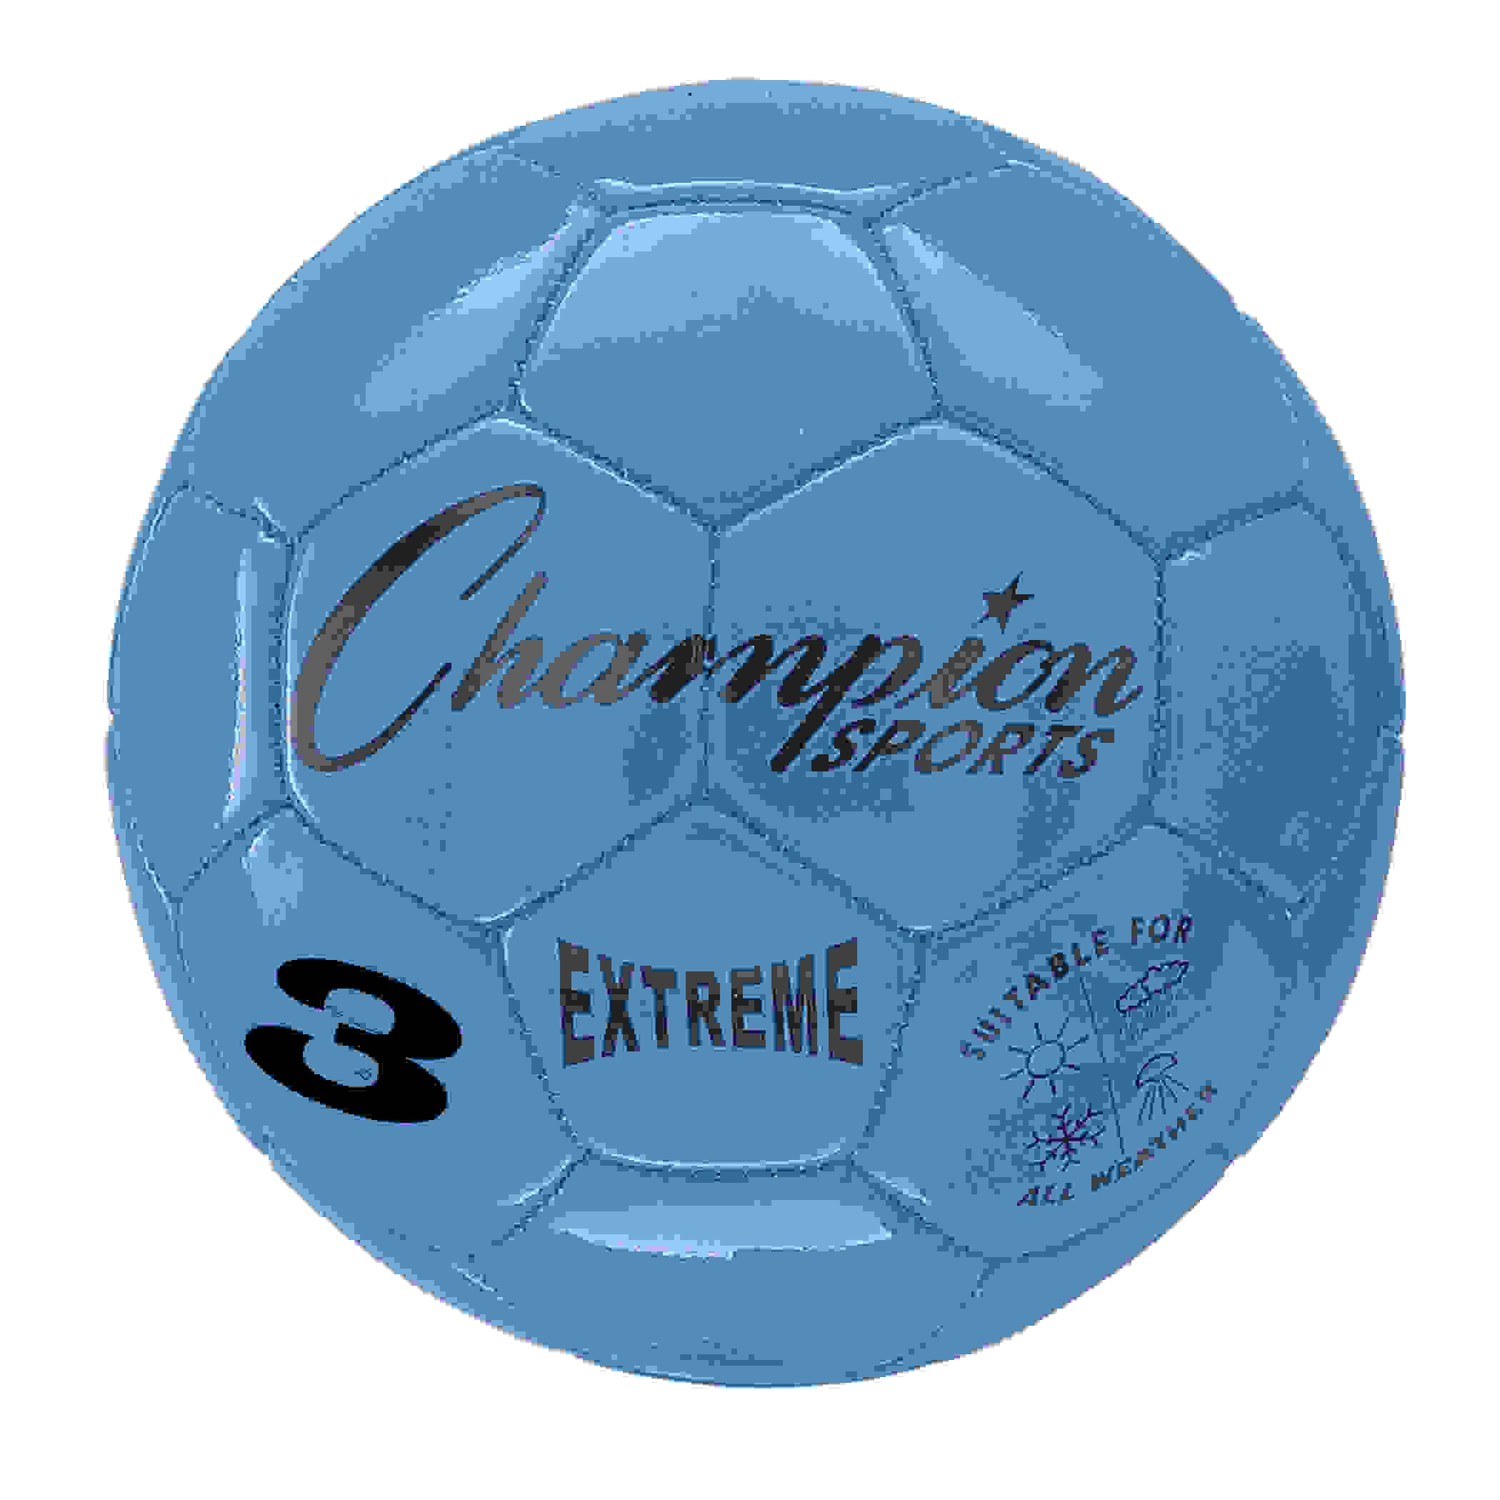 Extreme Soccer Ball, Size 3, Blue